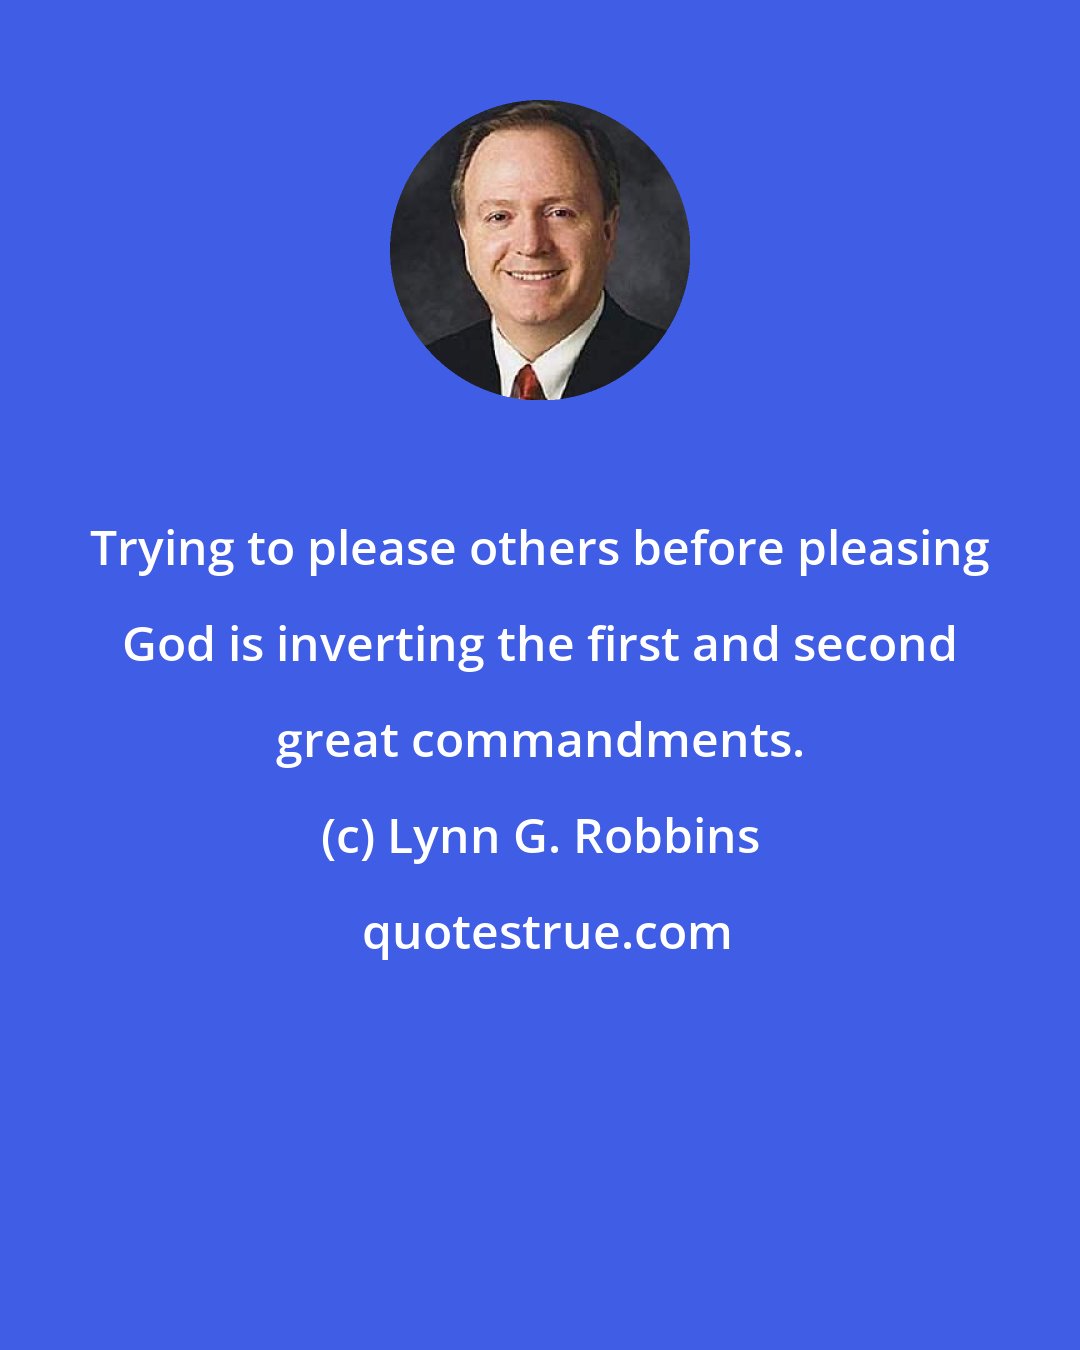 Lynn G. Robbins: Trying to please others before pleasing God is inverting the first and second great commandments.